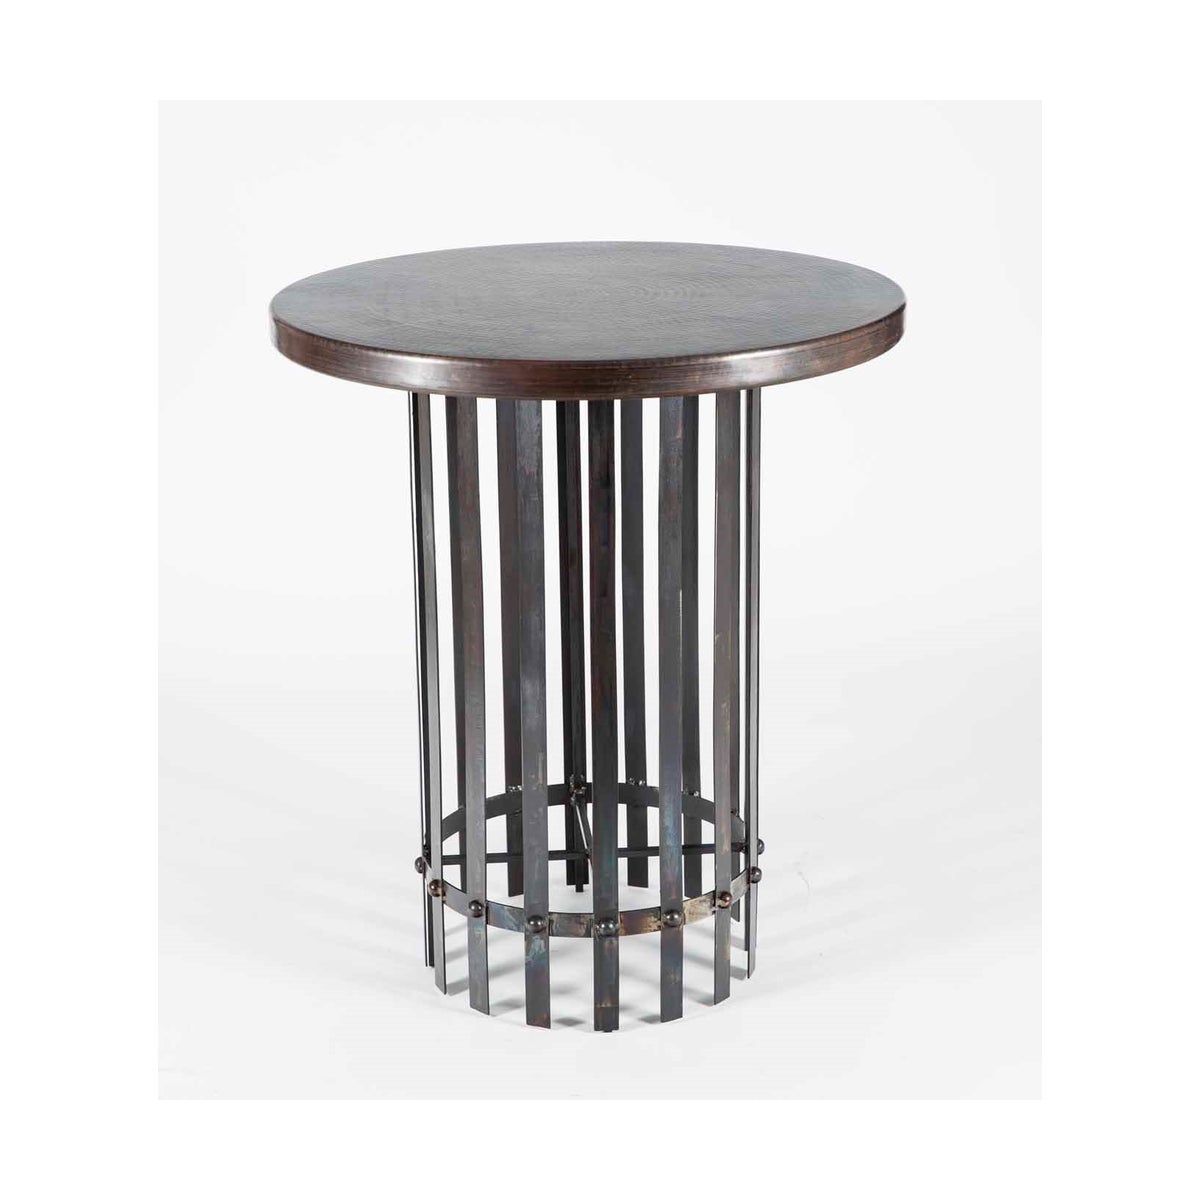 Ashton Bar Table with 36" Round Dark Brown Hammered Copper Top